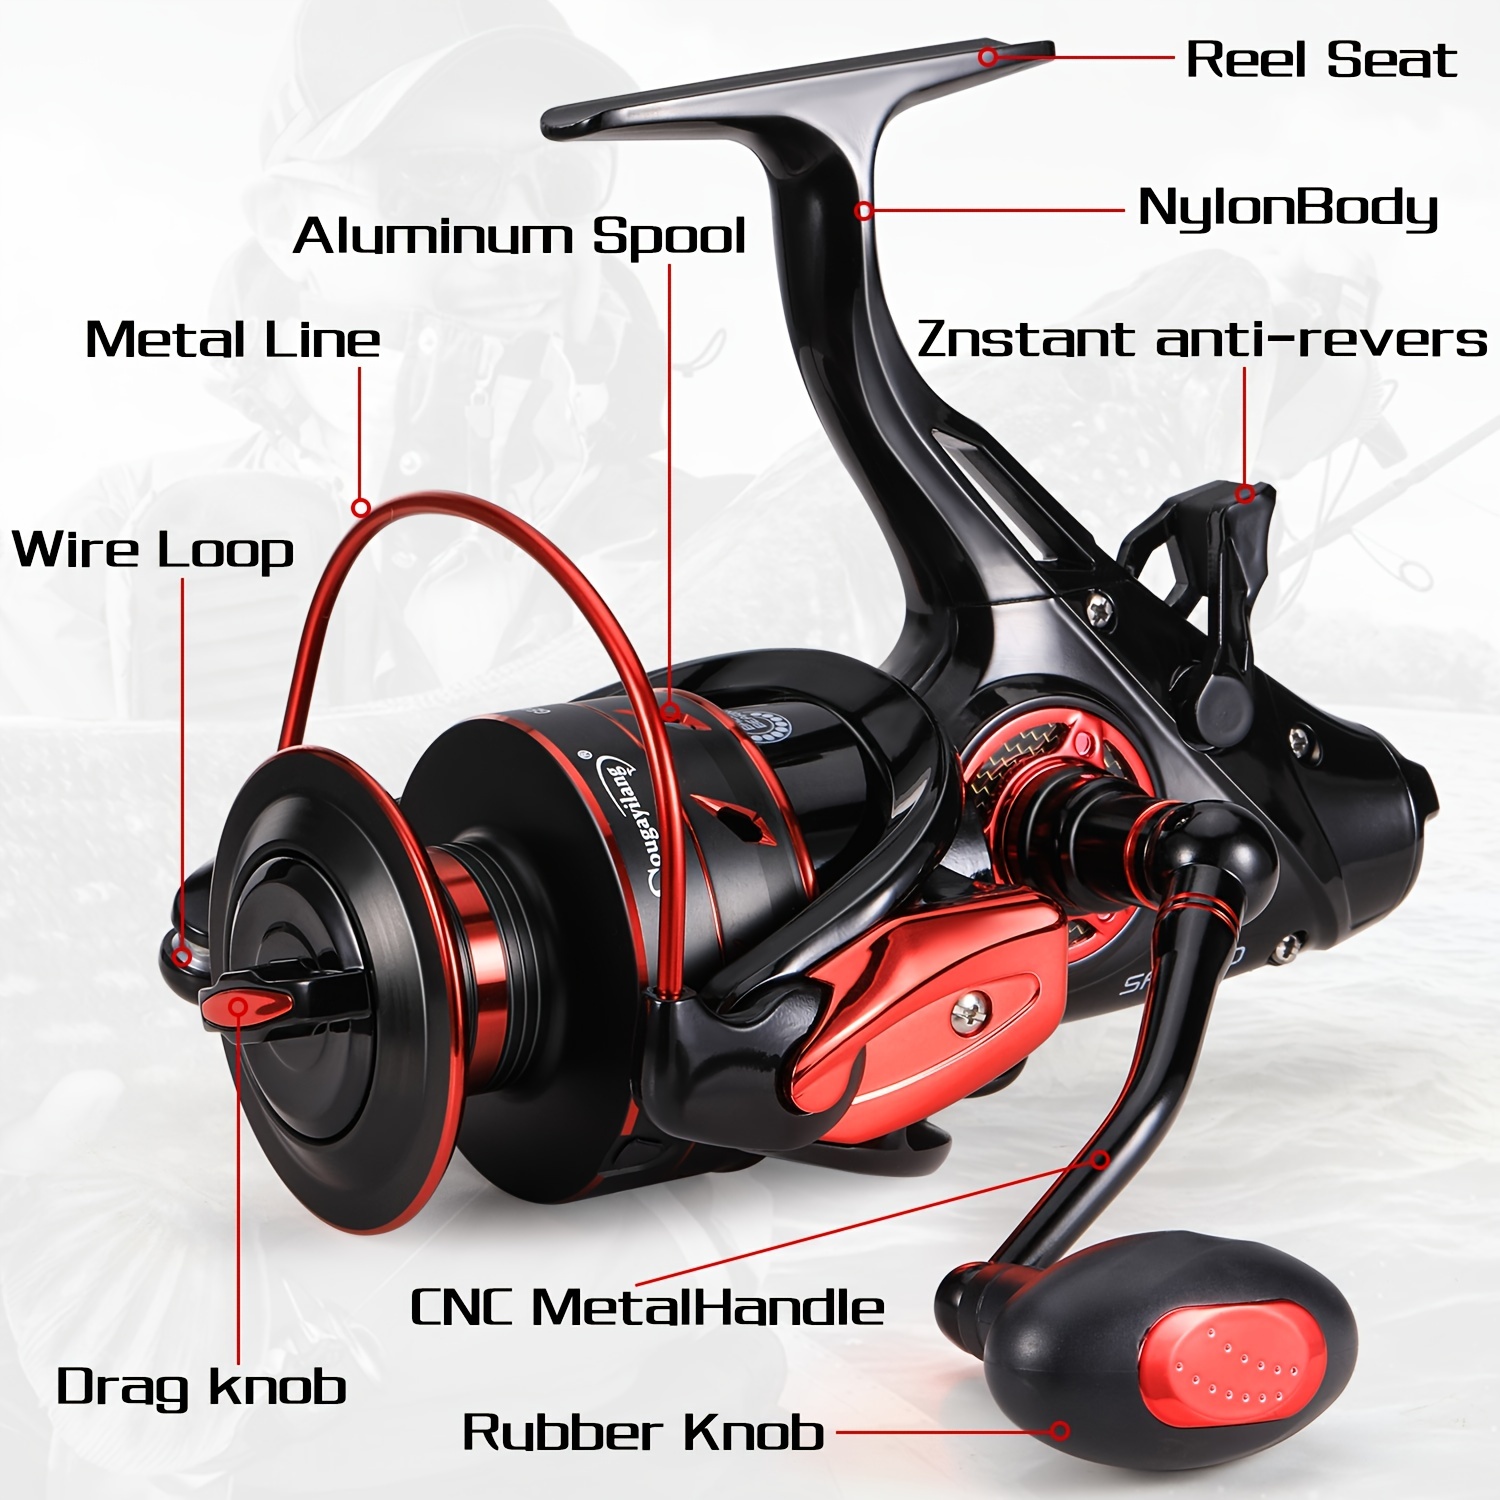 30KG Max Drag Top 10 Baitcasting Reels With Large Spool And Strong Body For  Saltwater Fishing Available In 9000, 10000, 12000, And 230606 From Dao05,  $31.8